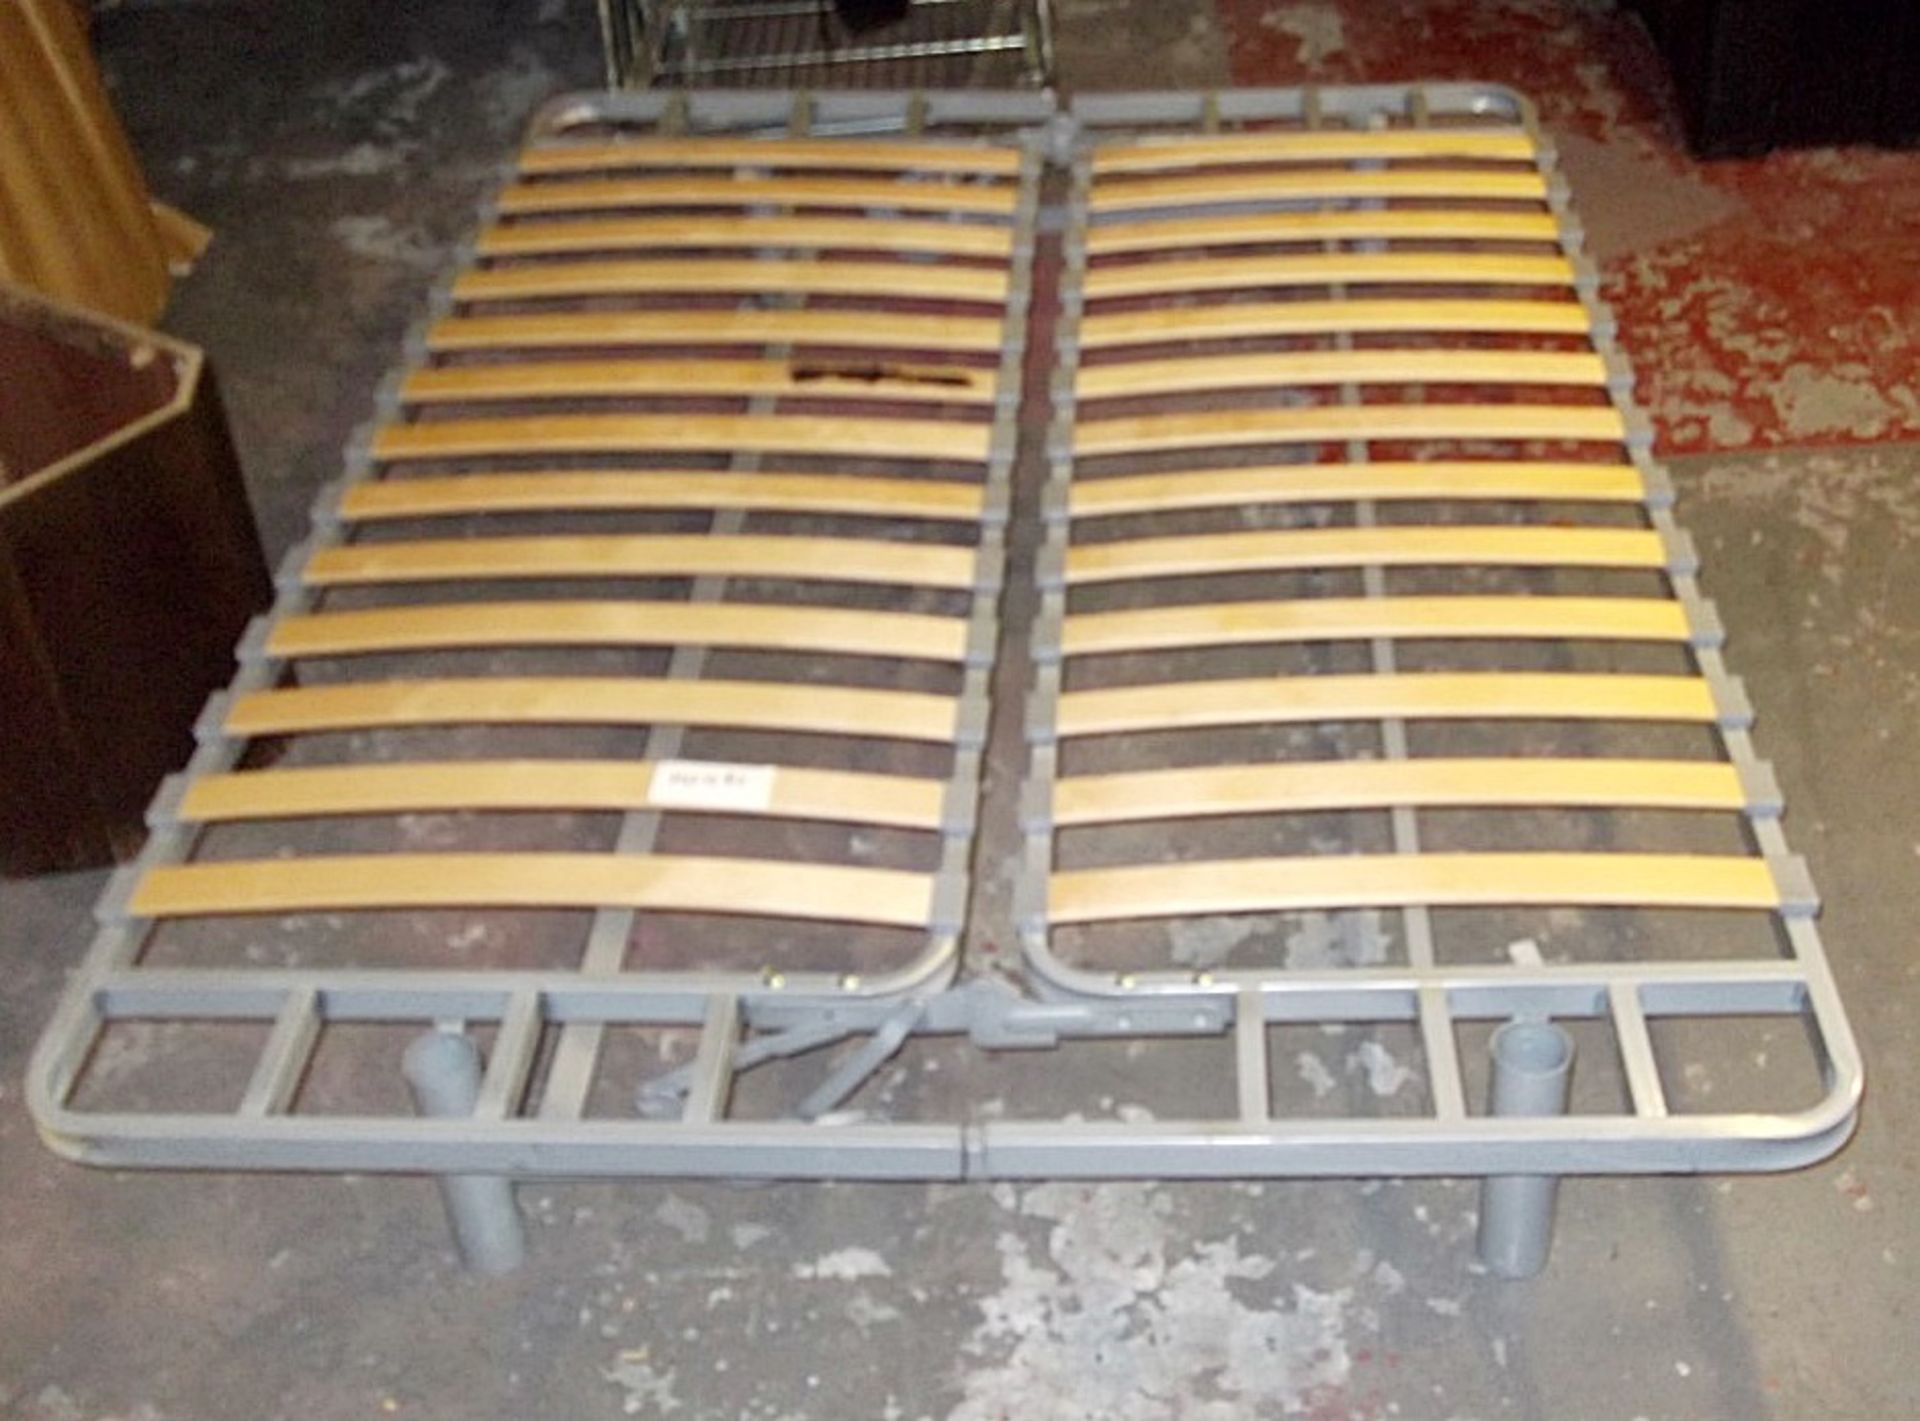 1 x Futon / Sofa Bed - Pre-owned In Good Working Condition With Mattress - Measurements: 200 x 140cm